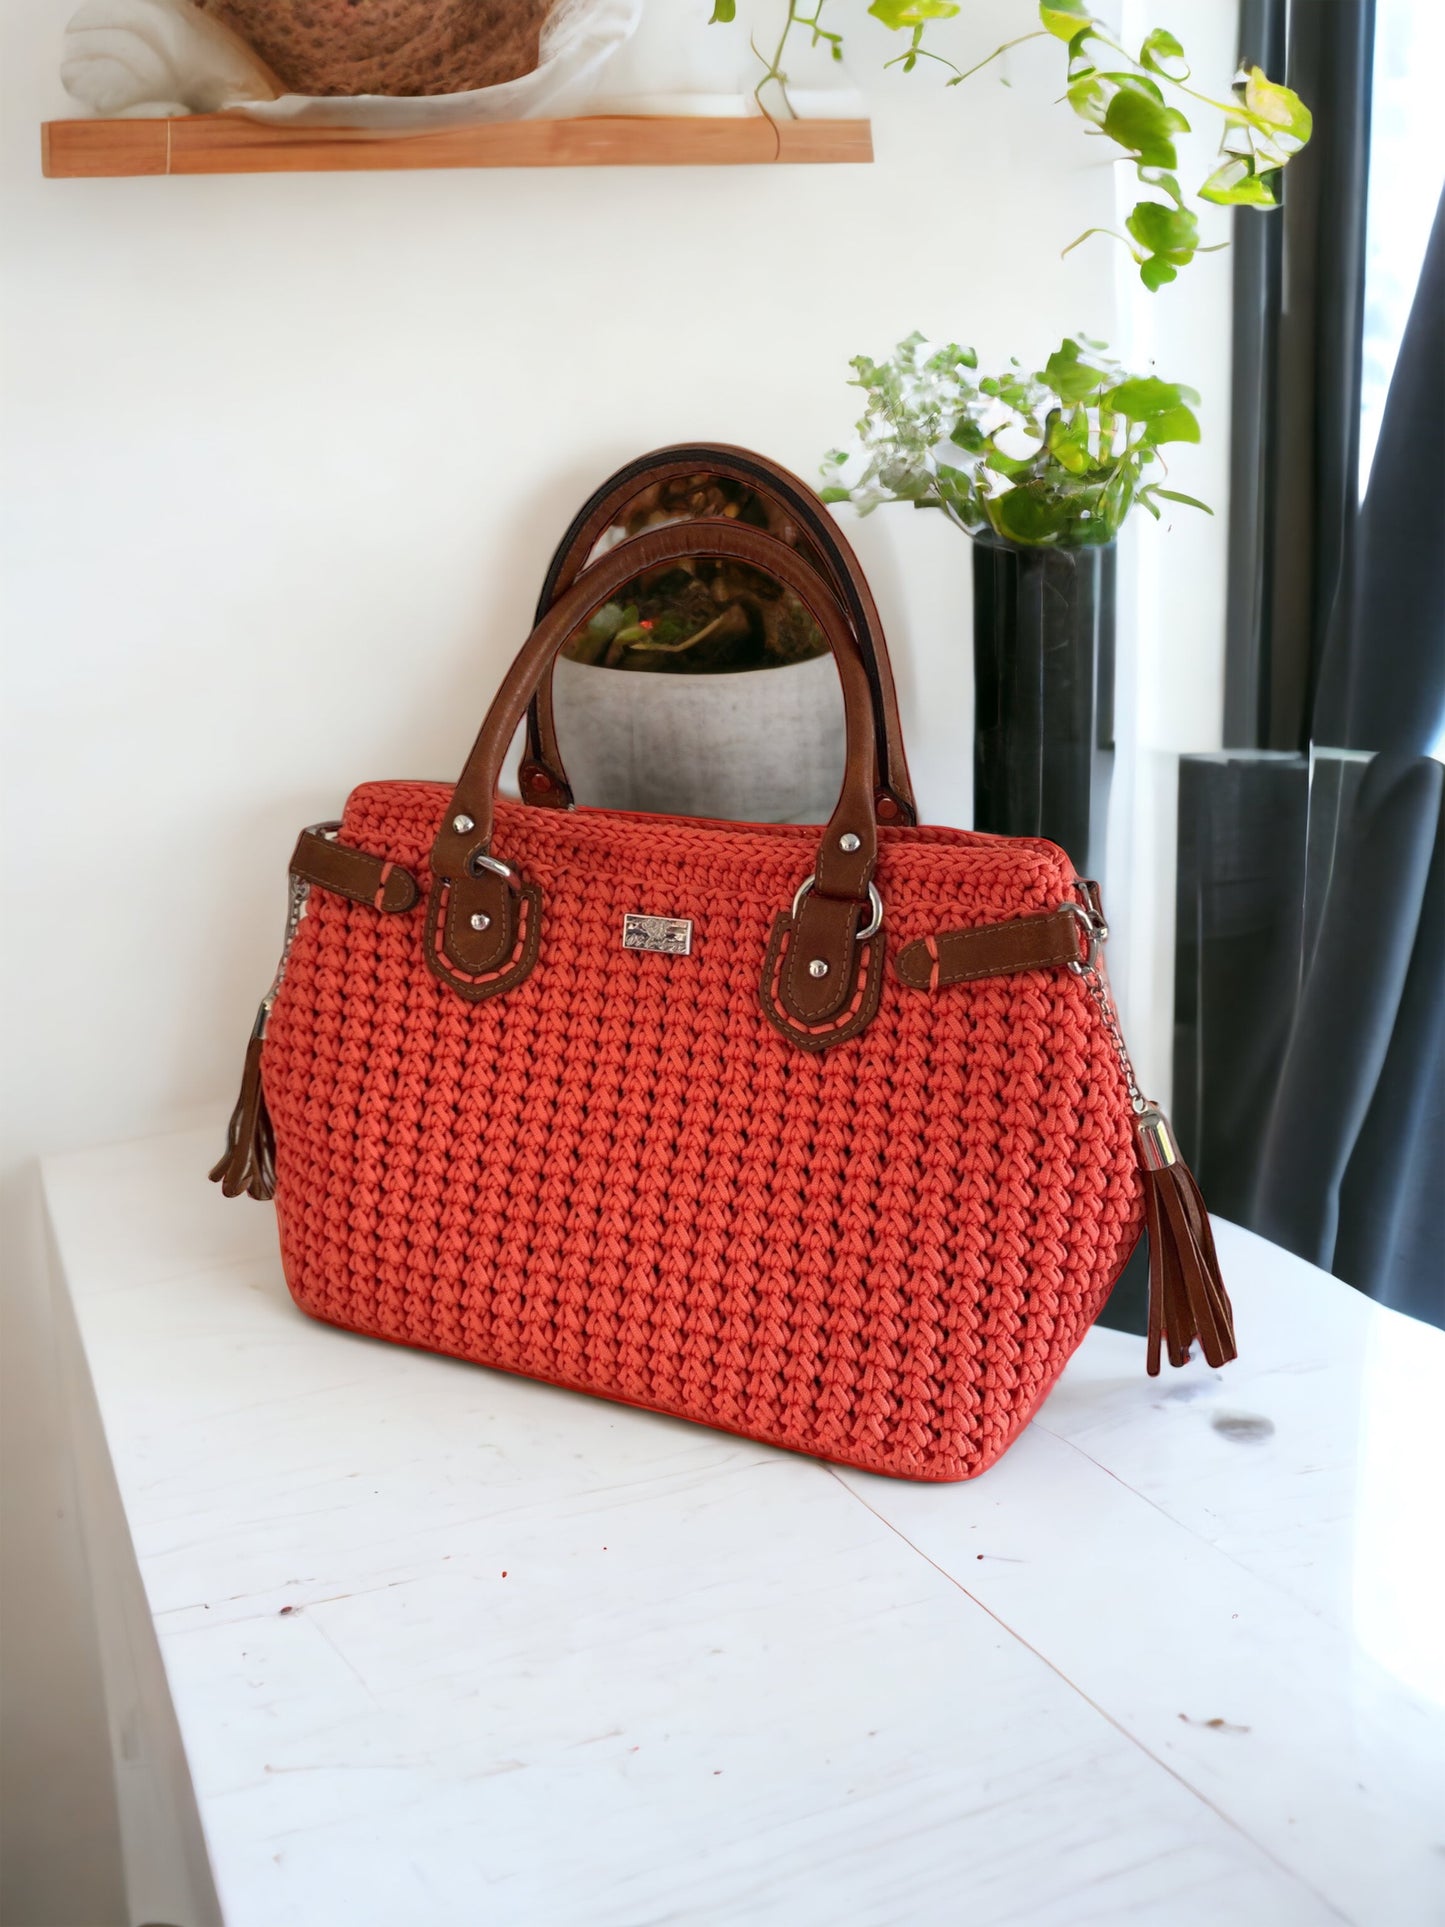 Top quality TOTE handbag with Eco leather components for fashionable ladies